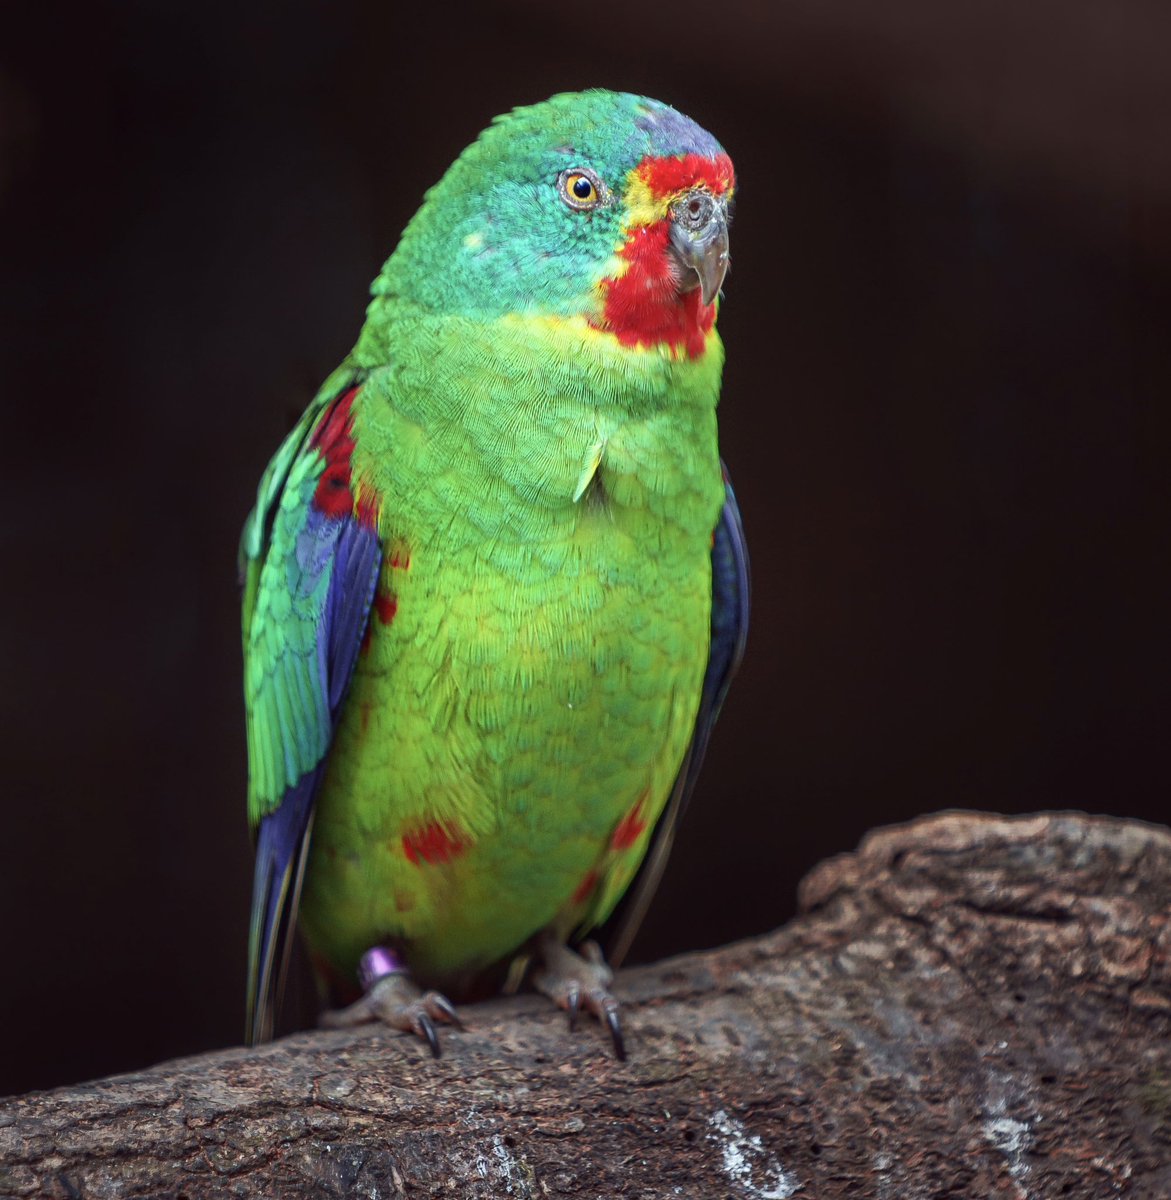 “Kik-kik-kik, kik-kik-kik' is the flute-like, metallic chirruping call of the critically endangered Swift Parrot 🦜❤️ Unless we act, their song could disappear from the wild within 10 years.

#Aves #BirdConservation #BirdWatching